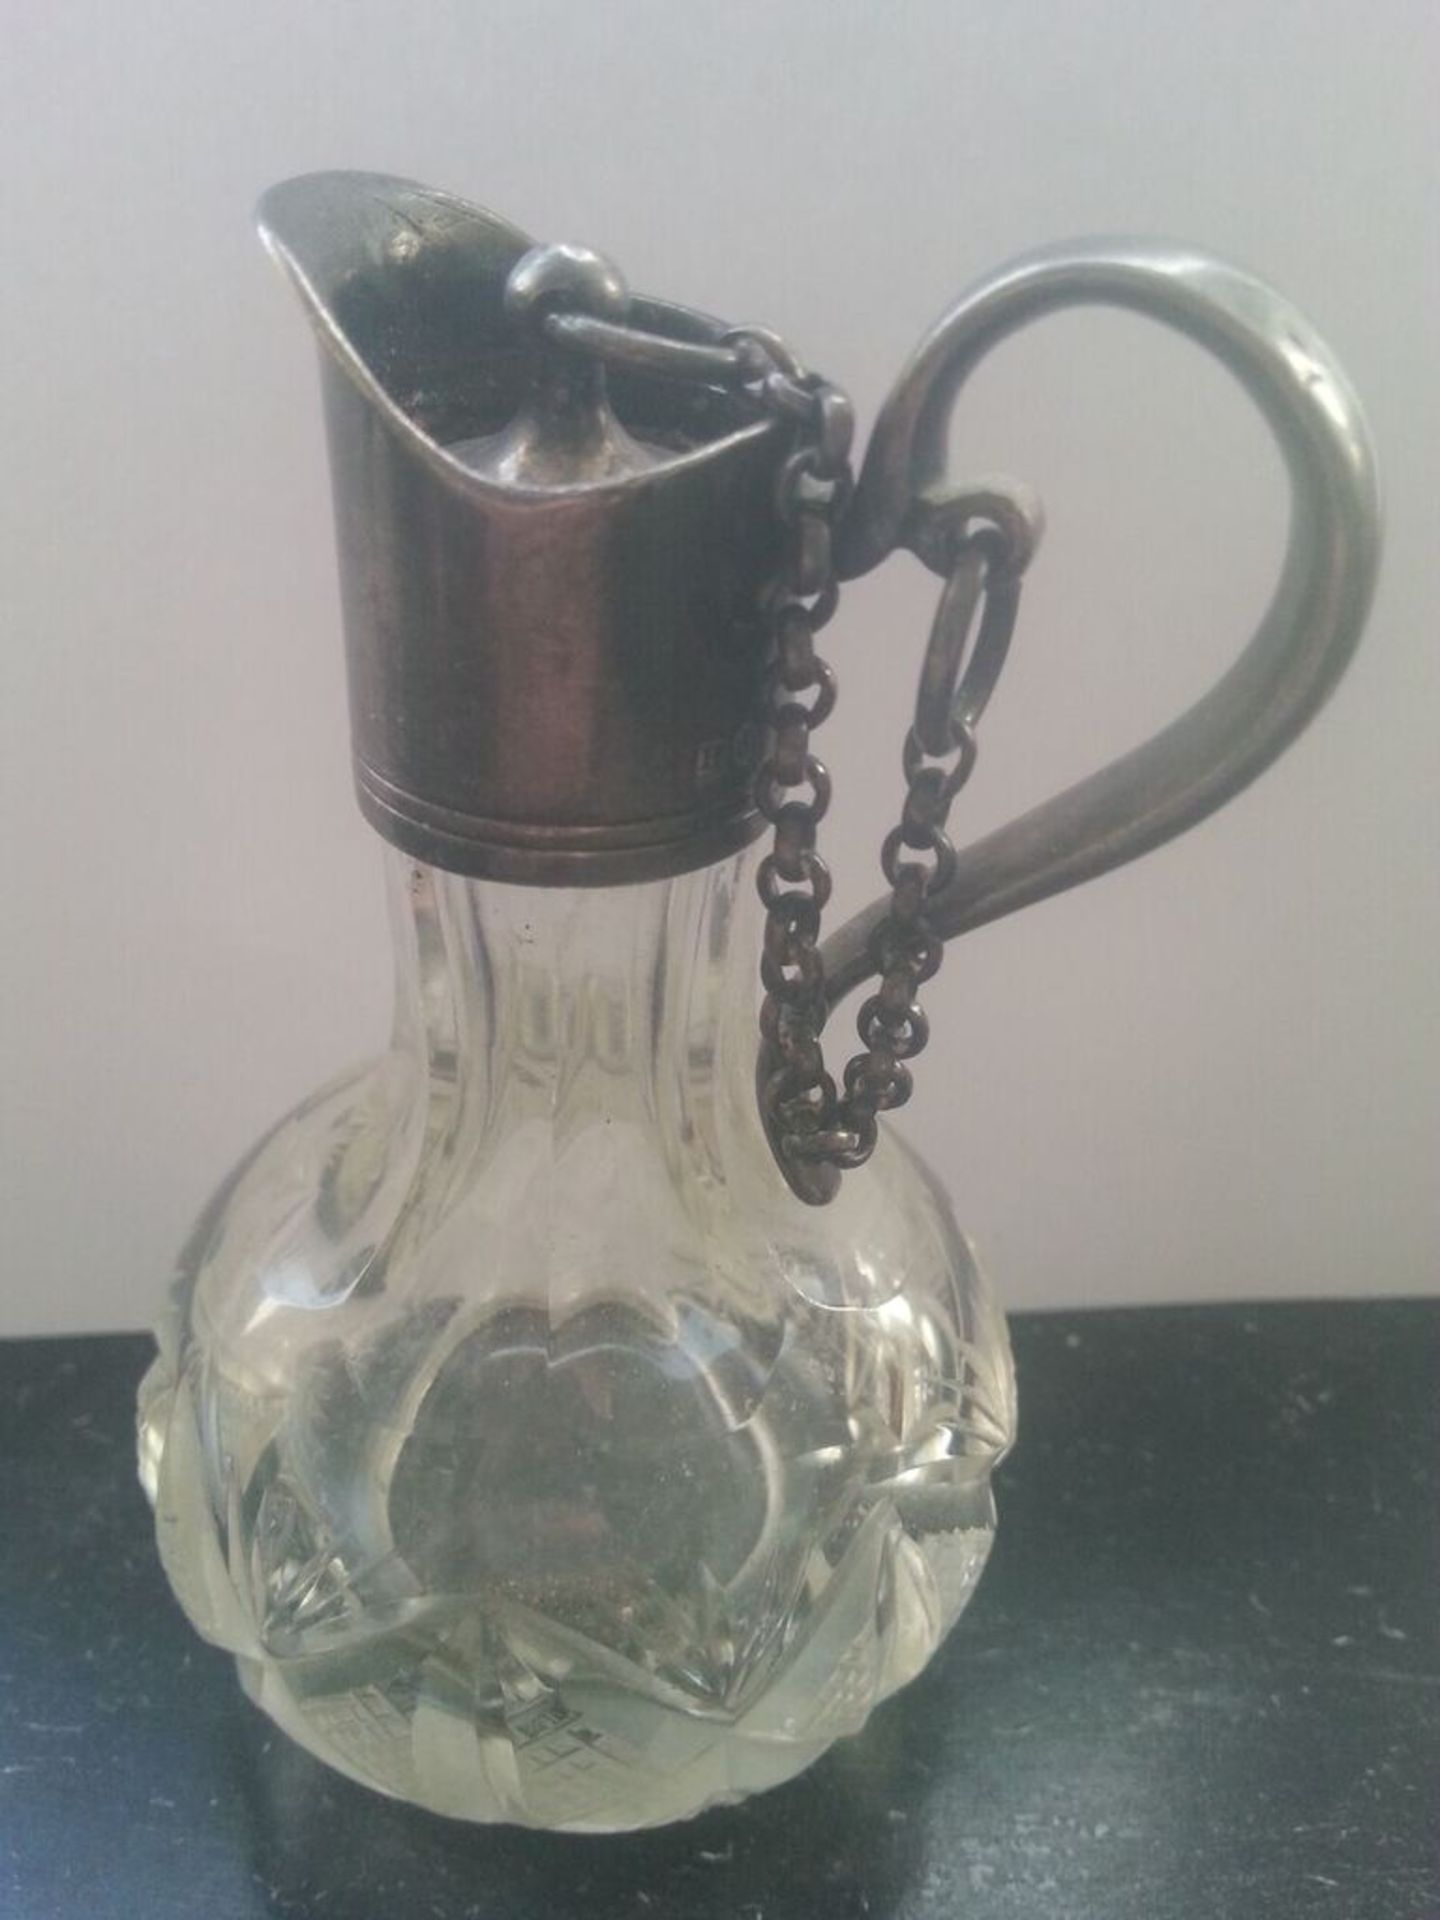 Stunning antique silver hallmarked (possibly Scottish - Glasgow) cut glass ewer with heavy stopper